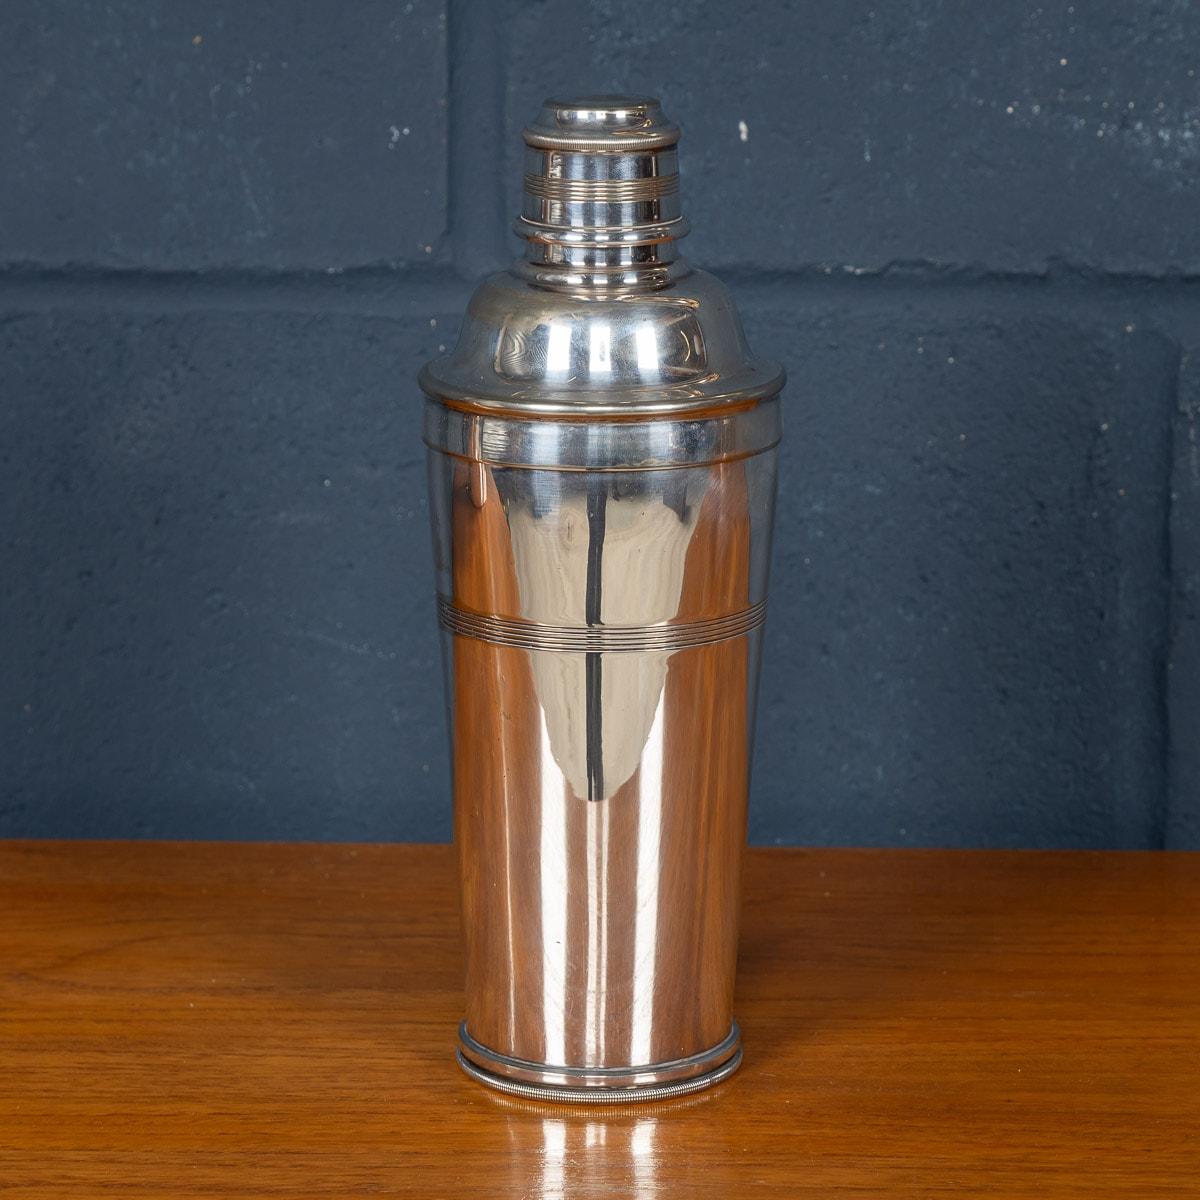 A rare and extremely unusual cocktail shaker made in England in the early part of the 20th century. Of particular interest is the double skinned construction of the shaker. The underside unscrews to reveal a compartment dedicated solely for ice.